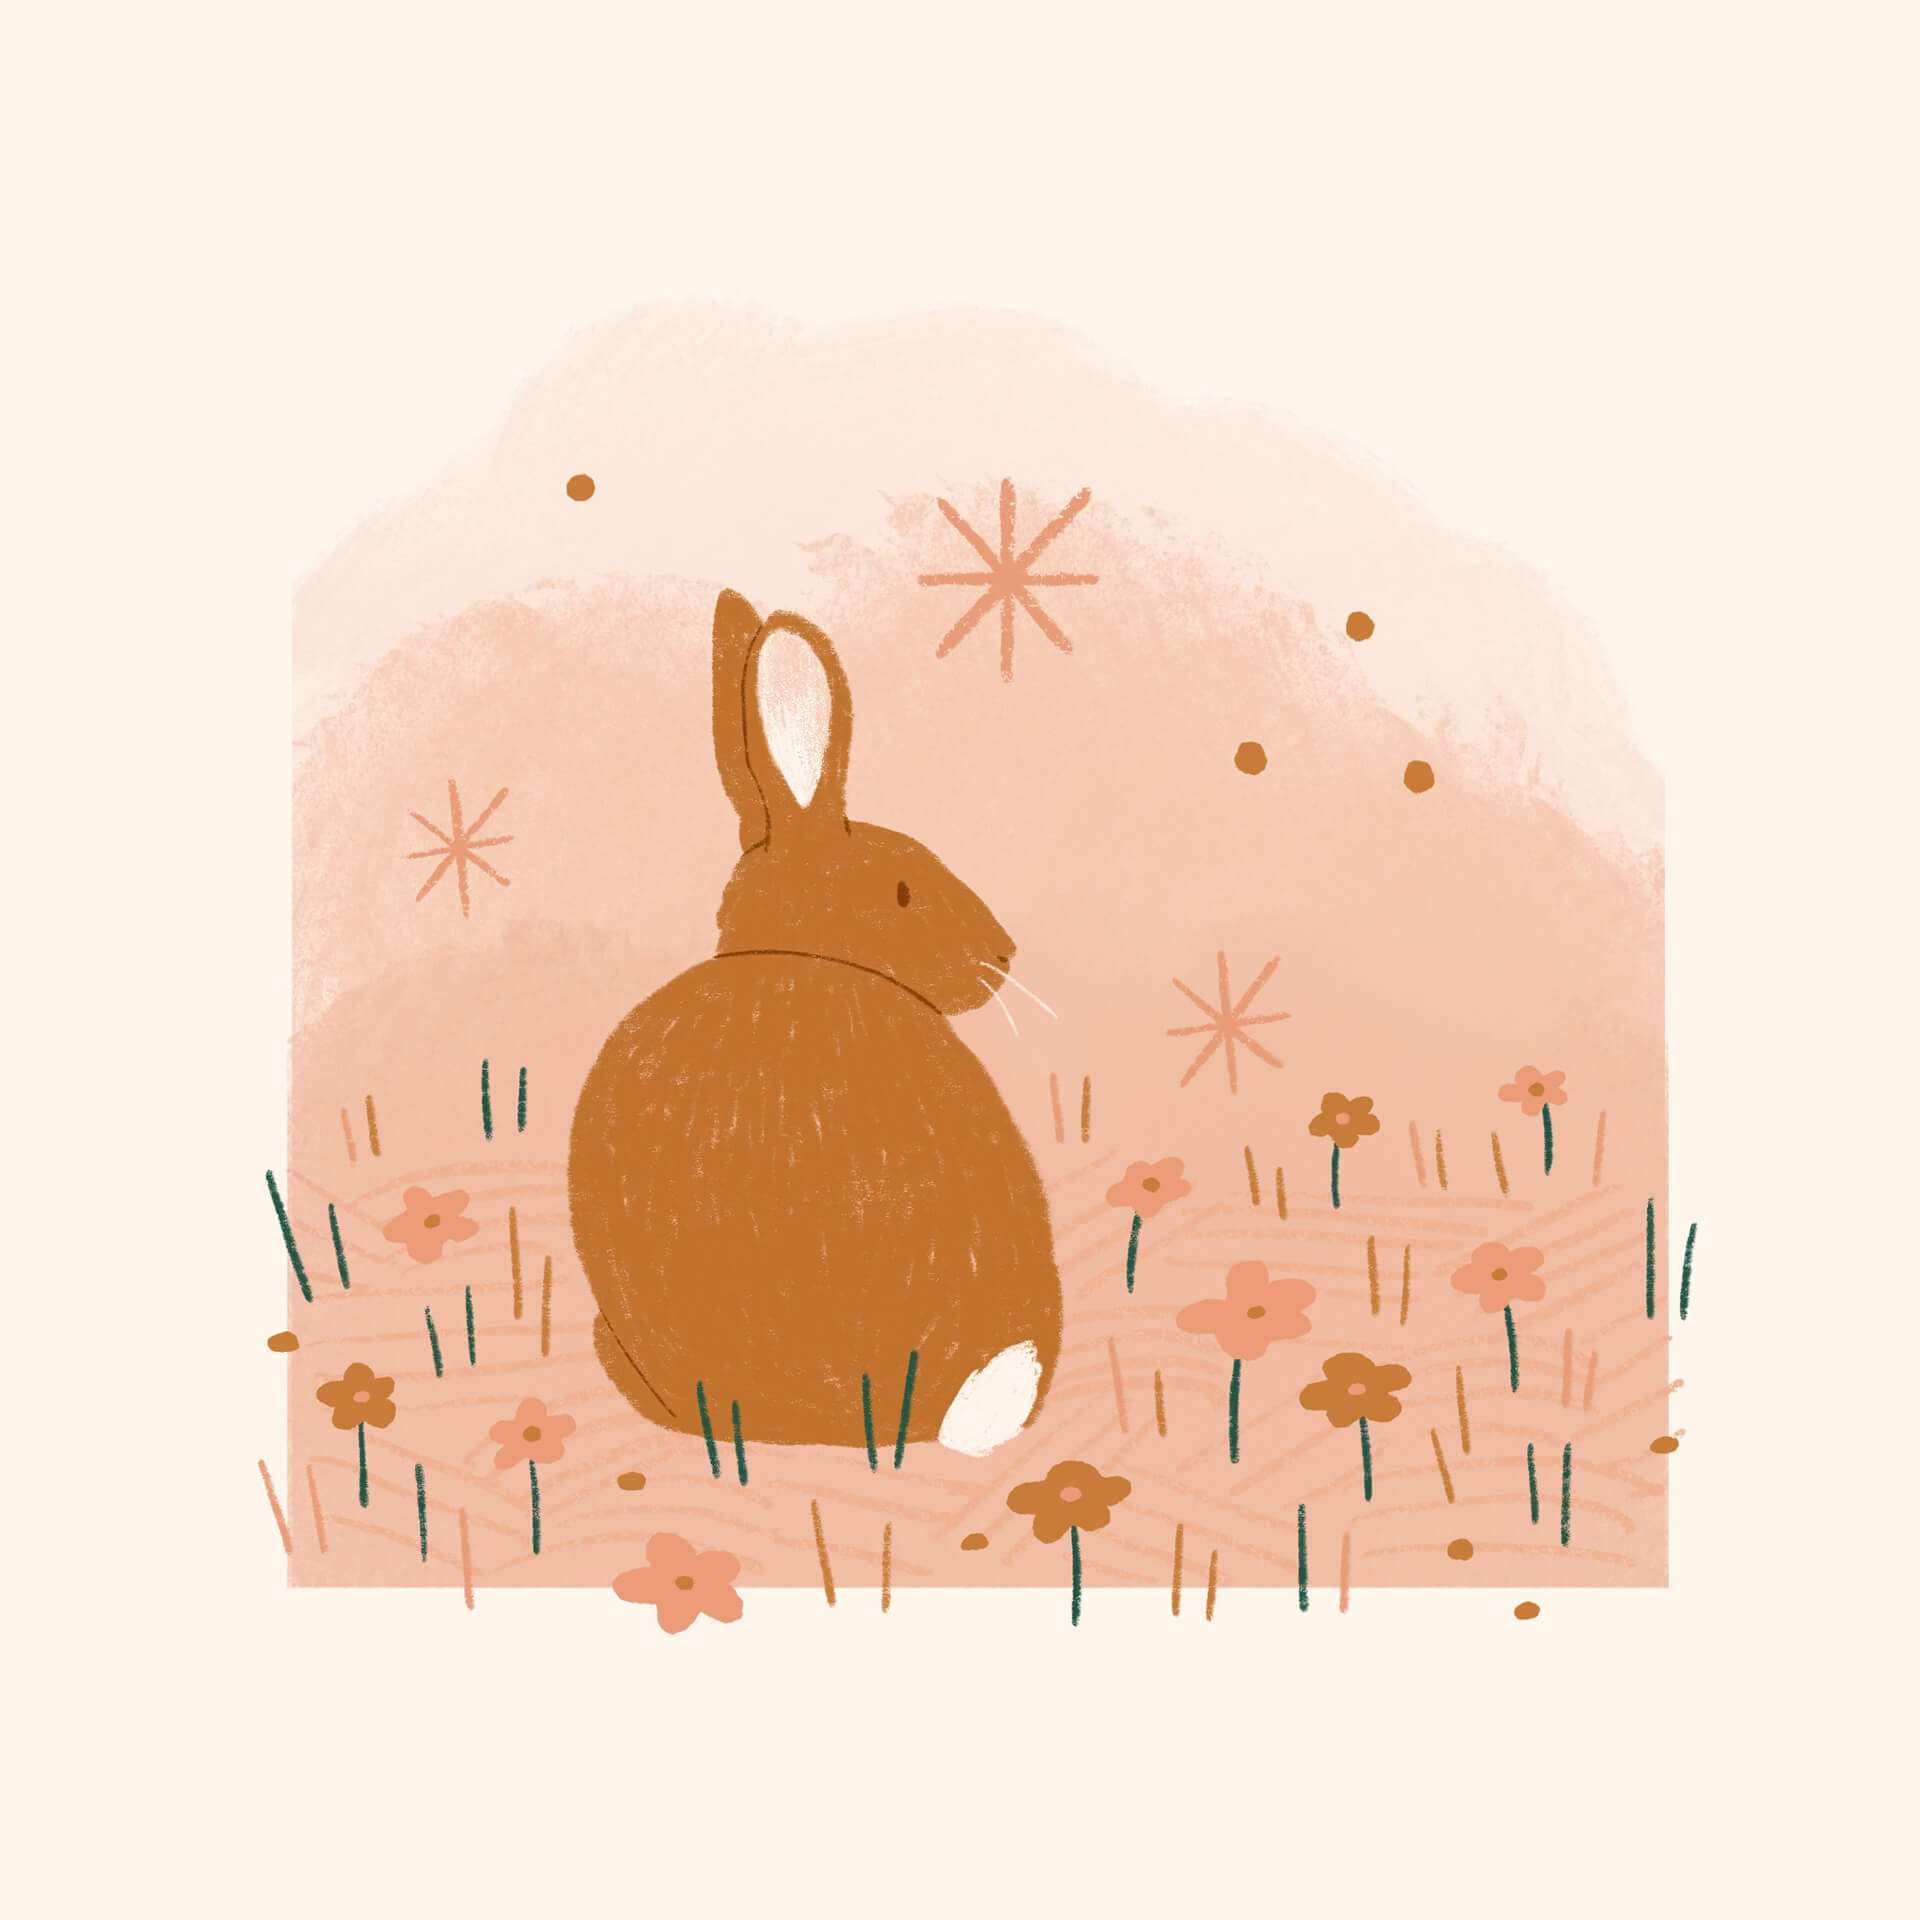 An illustration of an orange rabbit sitting with its back to the viewer, on a pink watercolour background